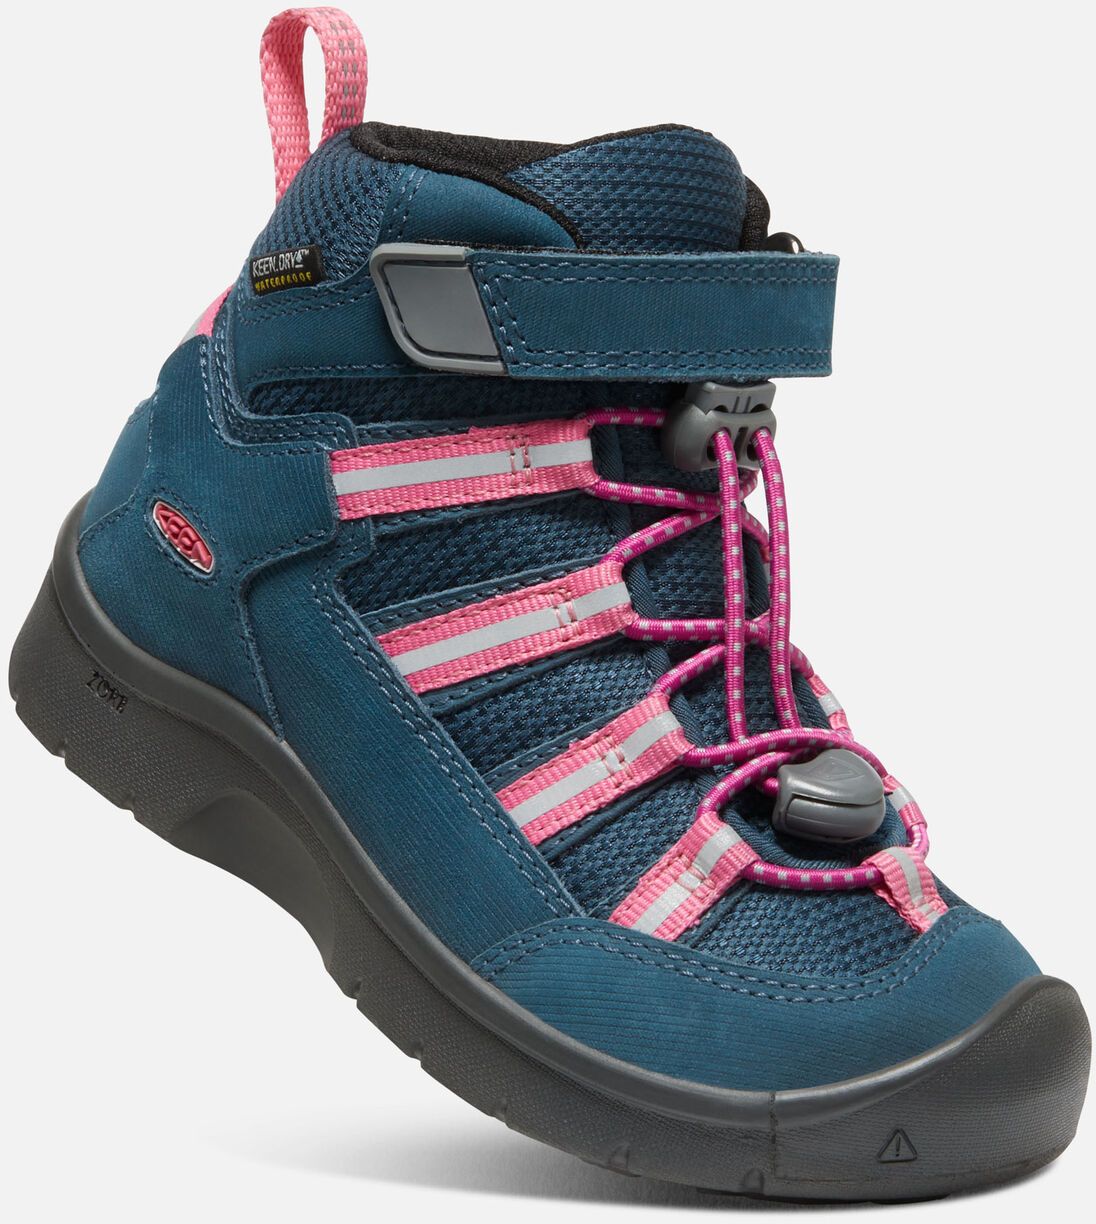 Keen HIKEPORT 2 SPORT MID WP YOUTH blue wing teal/fruit dove Velikost: 32/33 boty